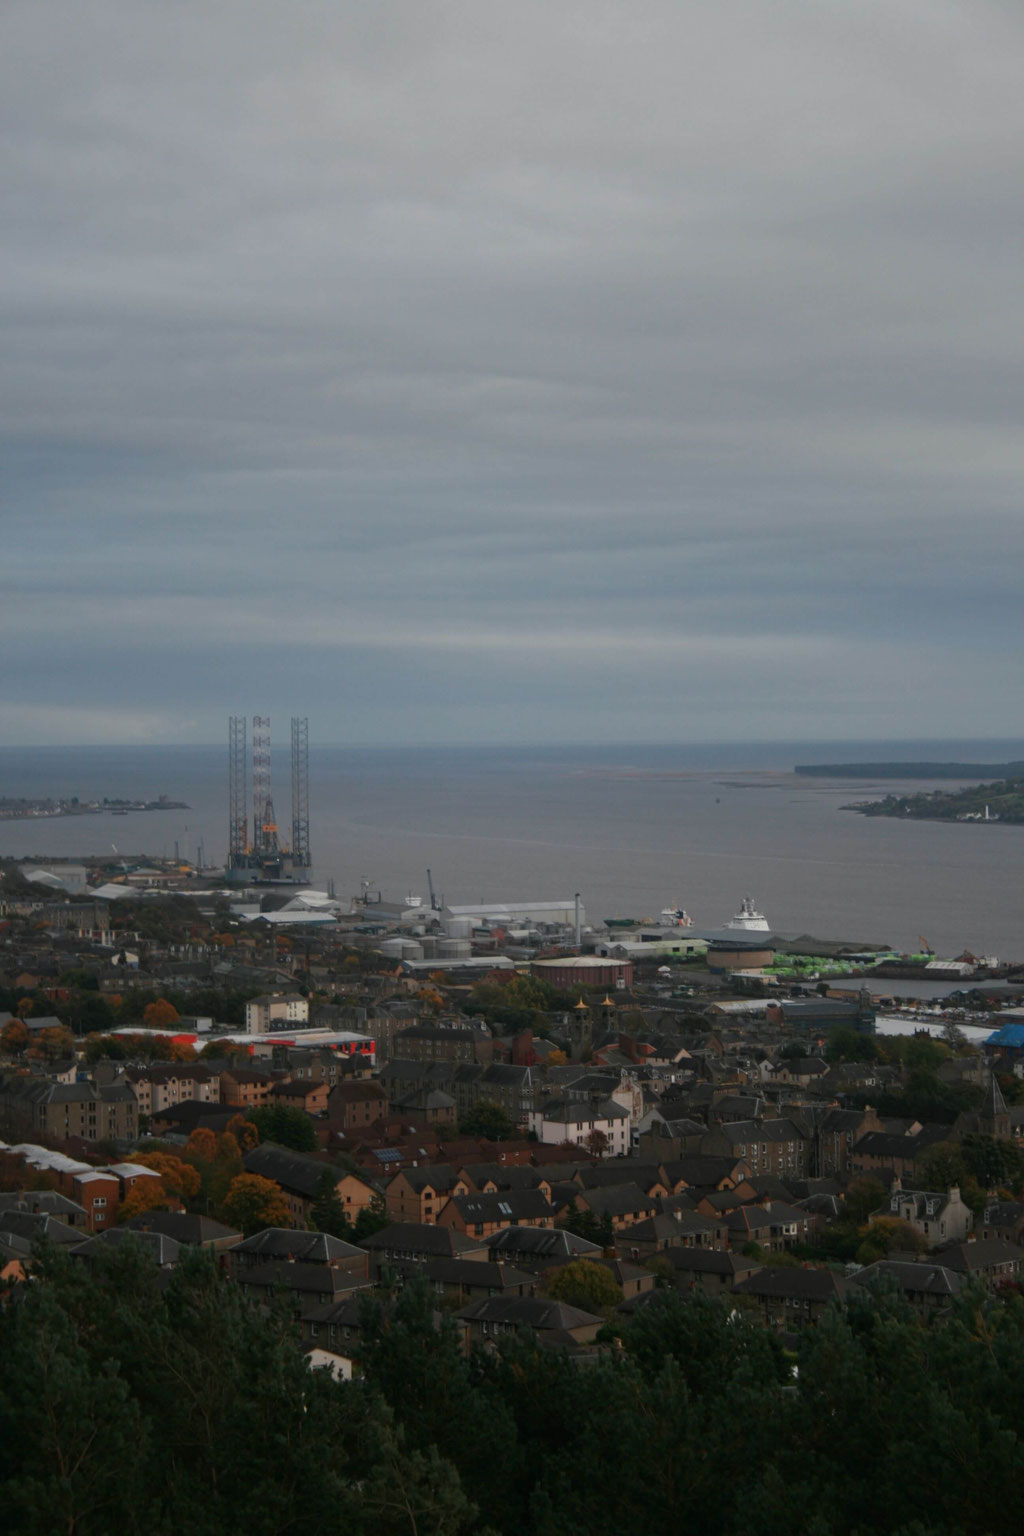 View from Dundee Law Viewpoint